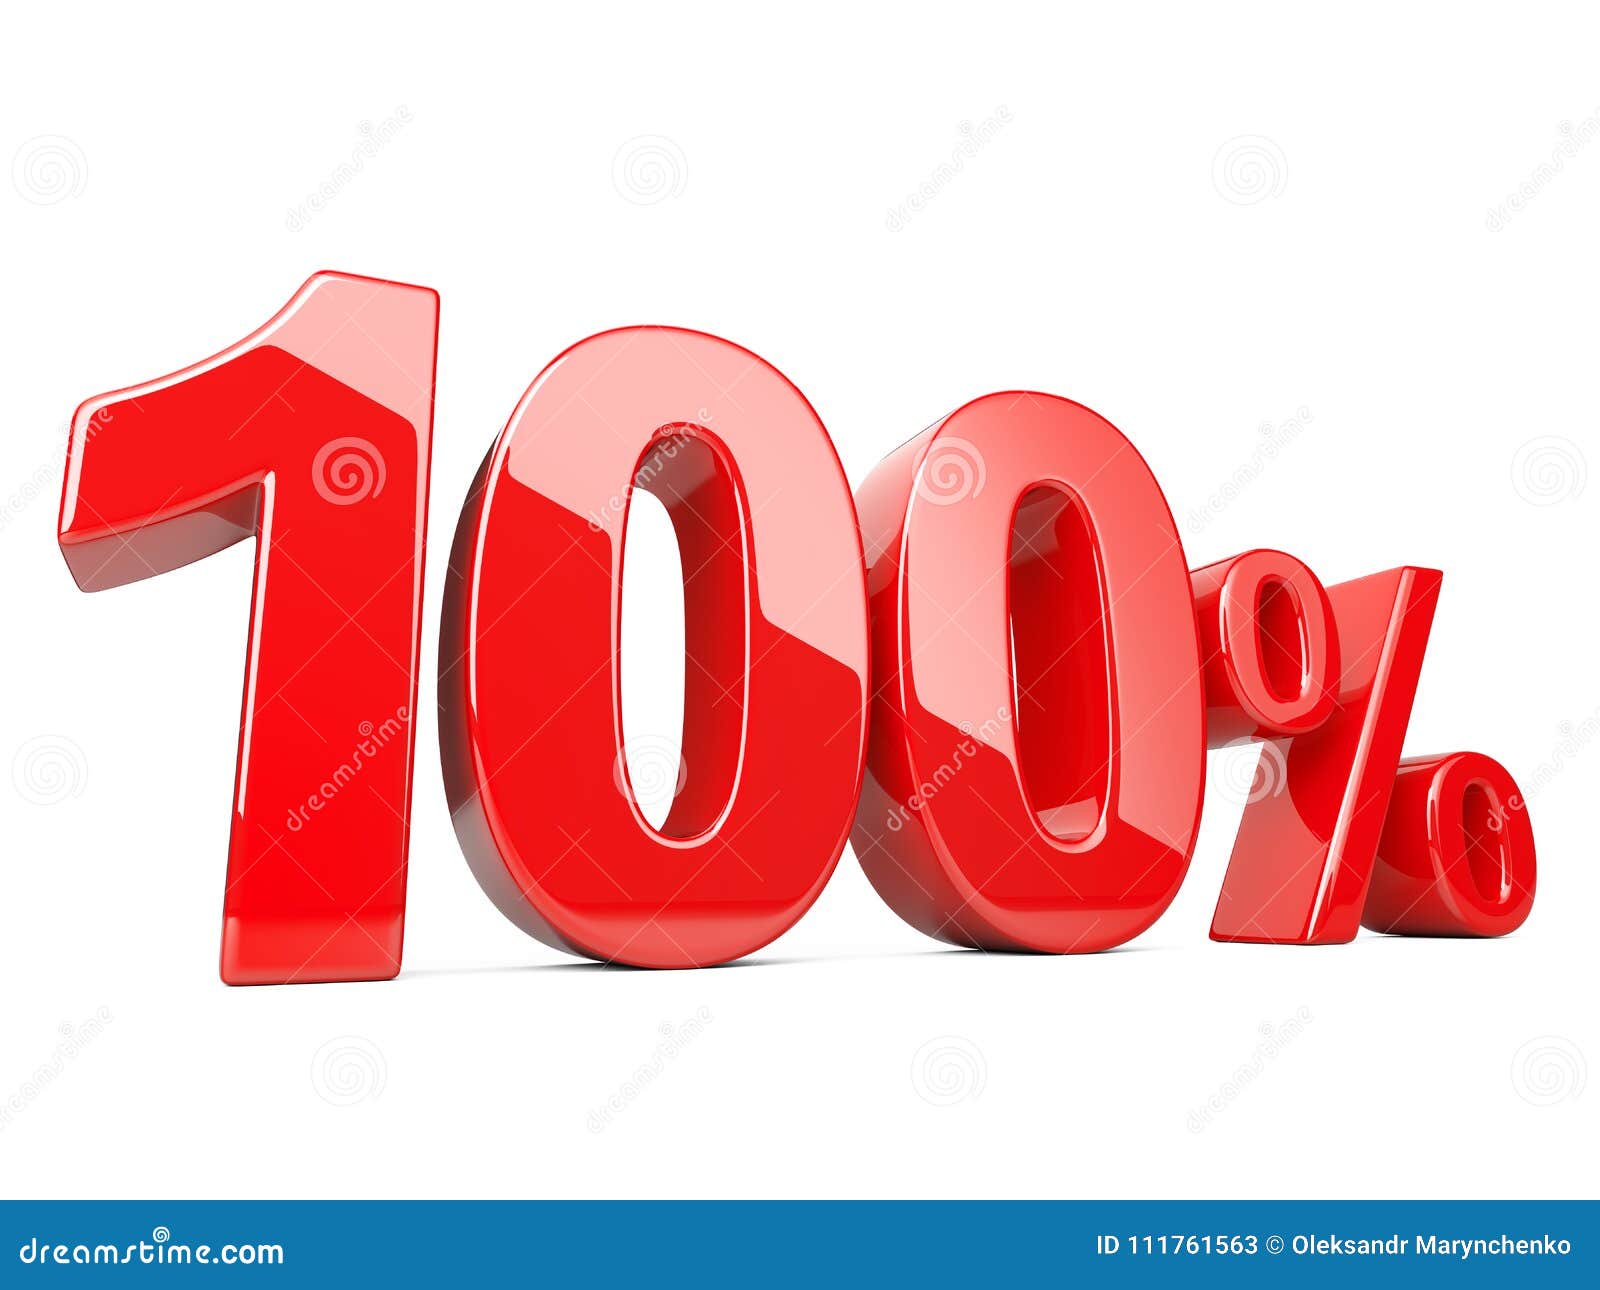 Hundred Red Percent Symbol 100 Percentage Rate Special Offer Stock